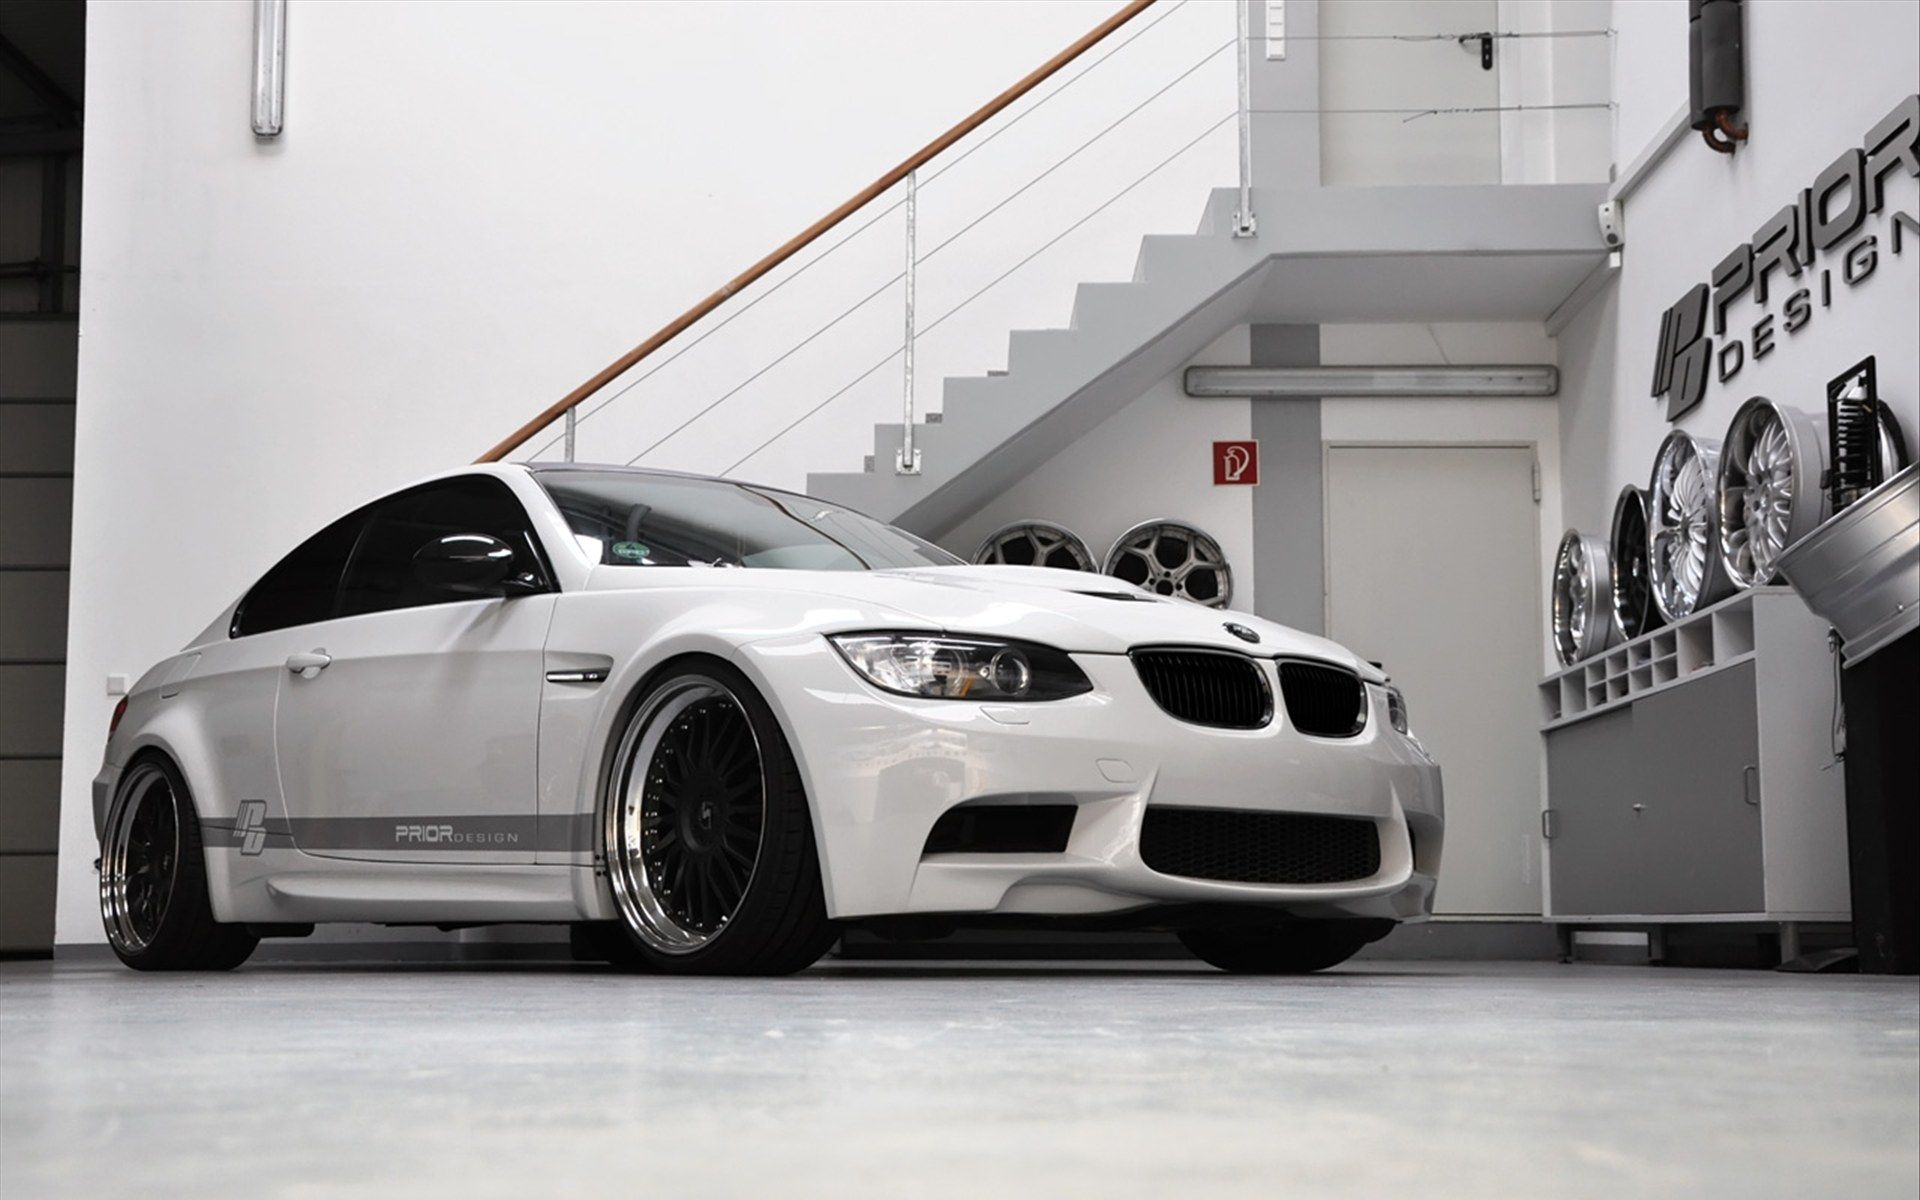 BMW M3 E92 Free Desktop Wallpapers for HD, Widescreen and Mobile